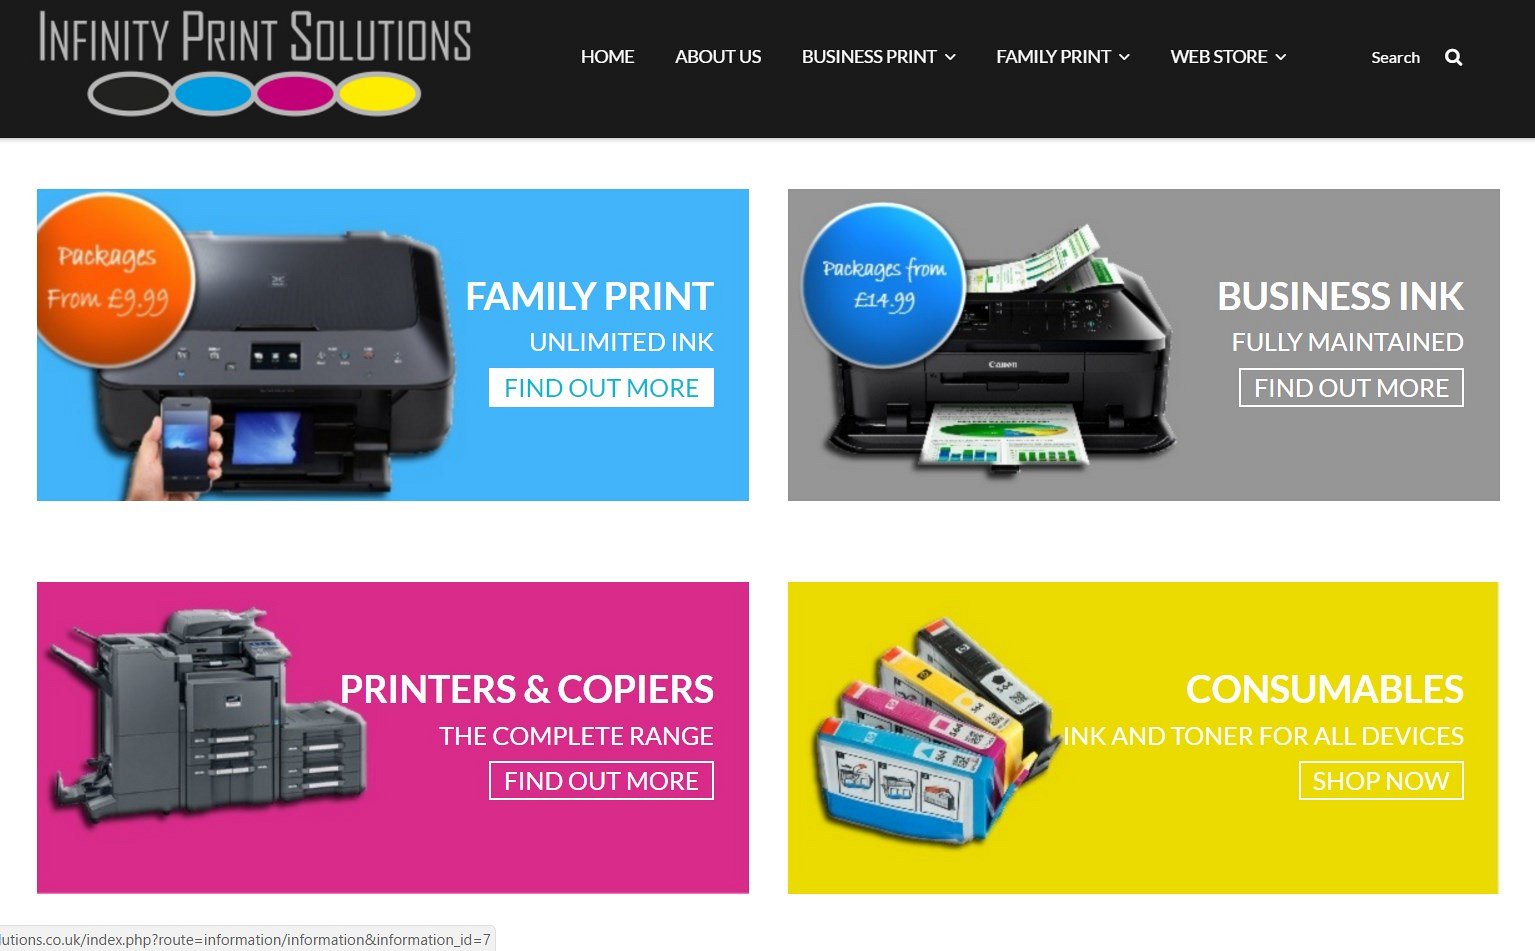 Infinity Print Solutions